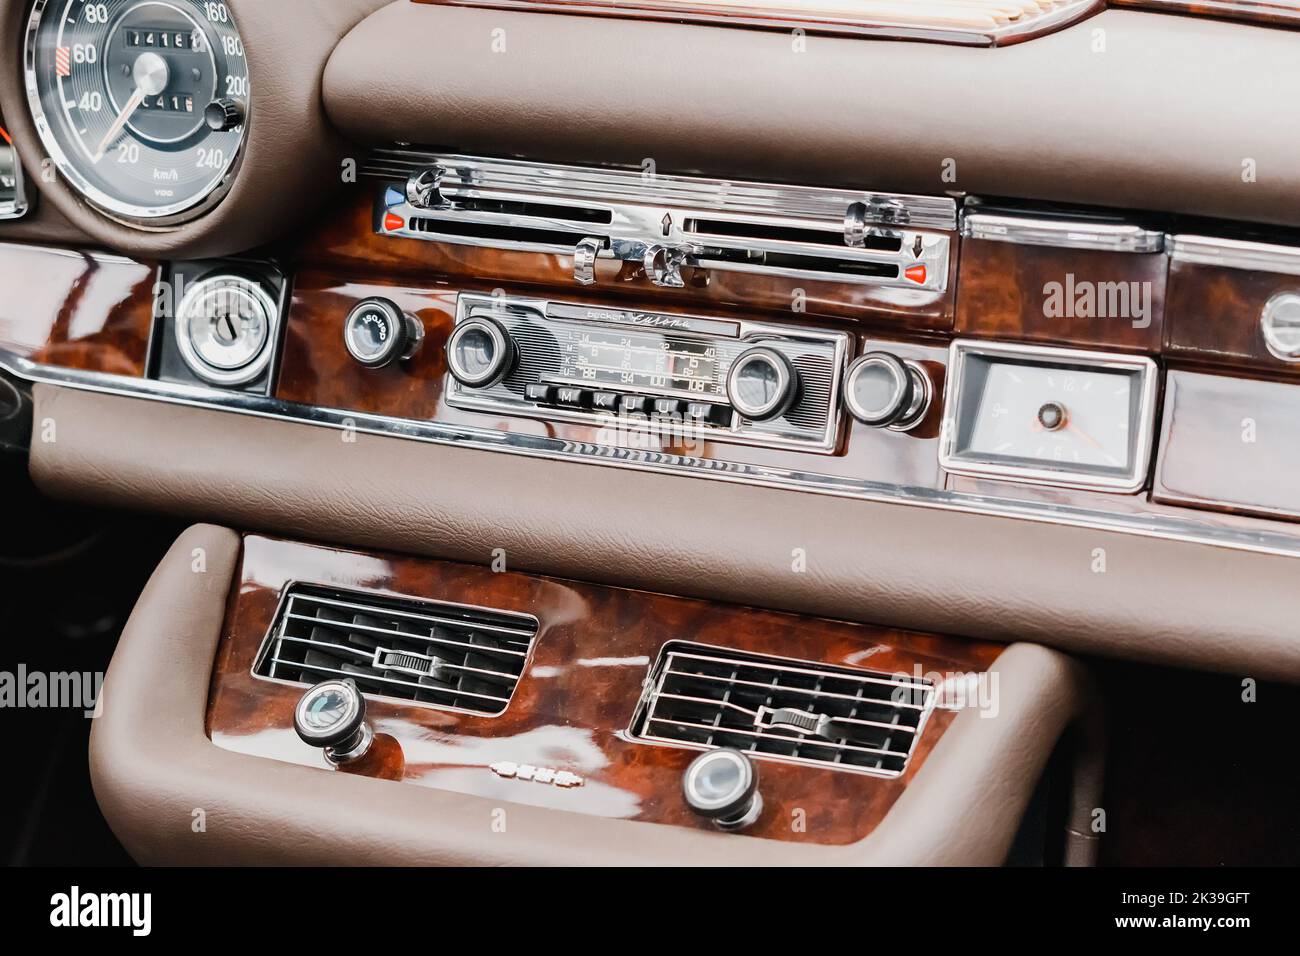 21 July 2022, Dusseldorf, Germany: Interior of a retro car with steering wheel and dashboard and radio Stock Photo